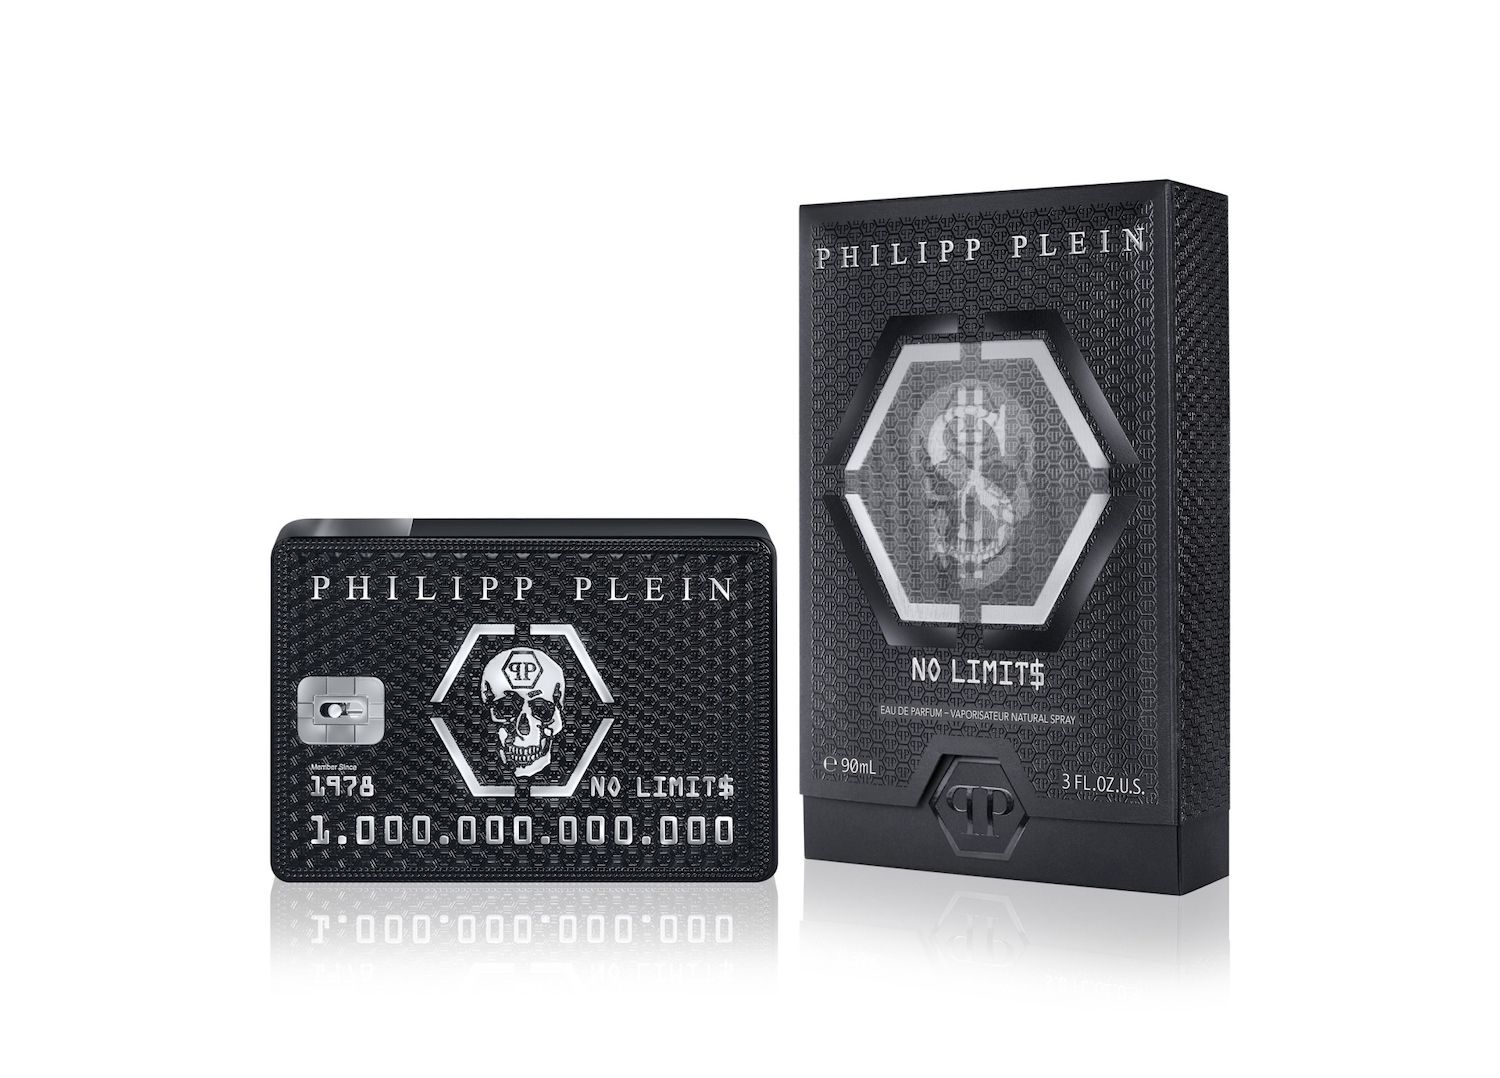 Philipp Plein’s New Men’s Fragrance is Shaped like a Credit Card with ‘No Limit$’